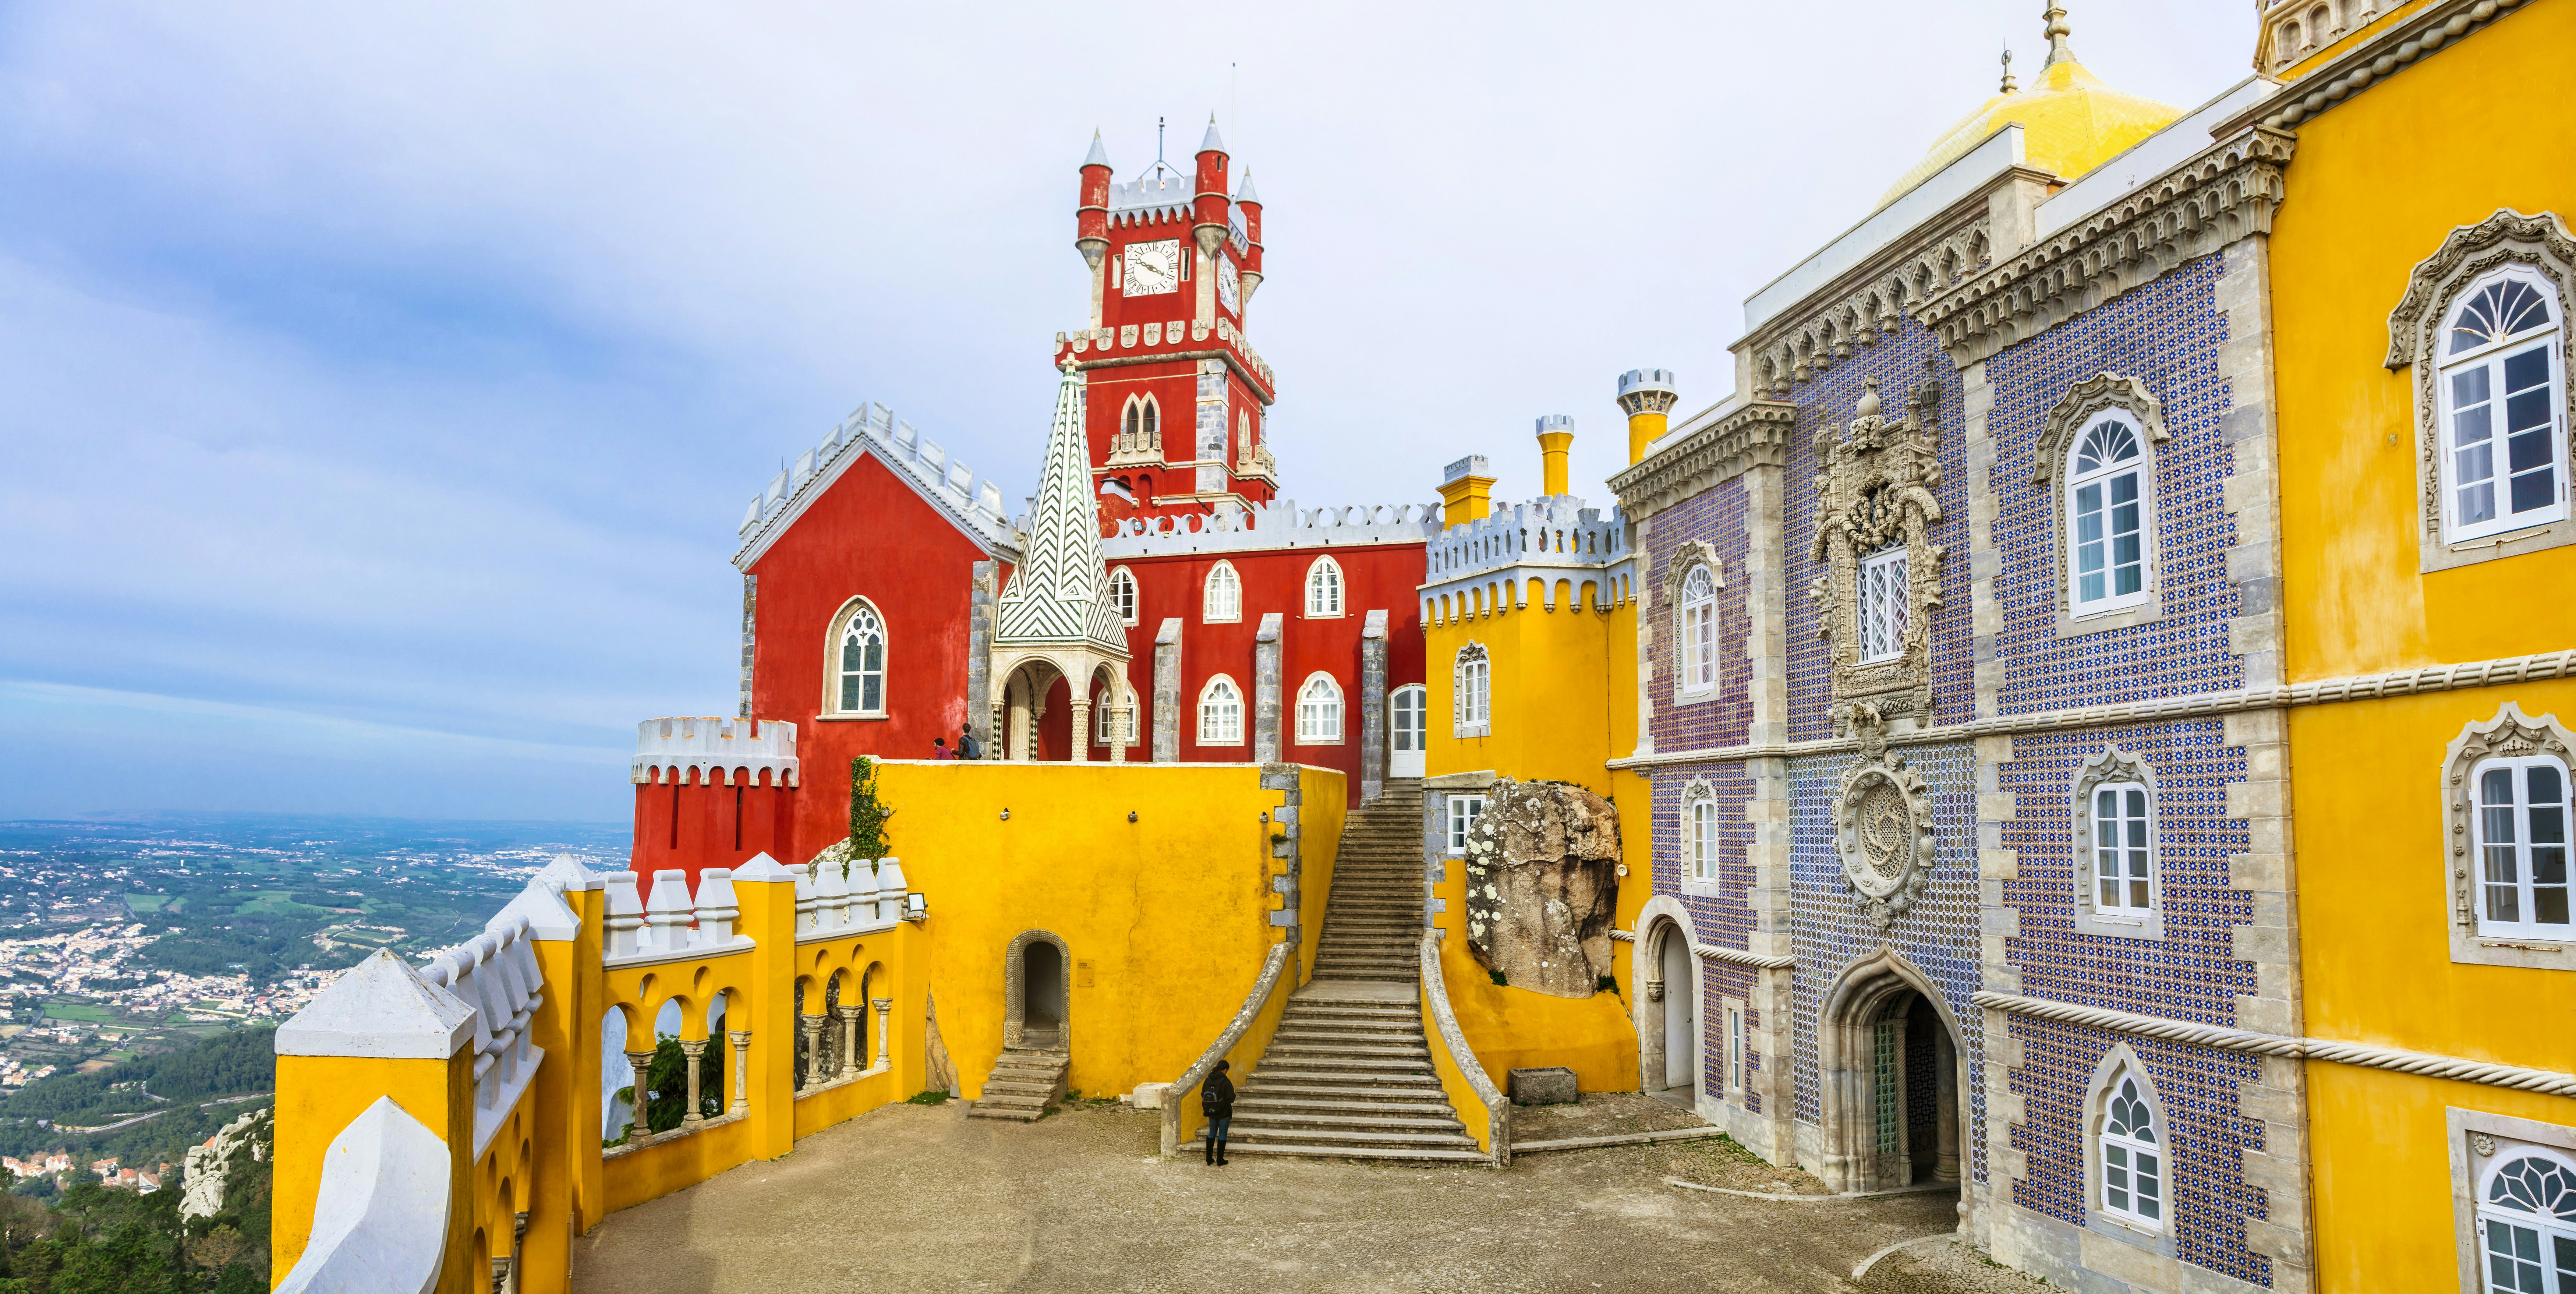 Exterior of the Palácio Nacional da Pena (Pena National Palace) in Sintra; its walls are painted bright yellow and orange.